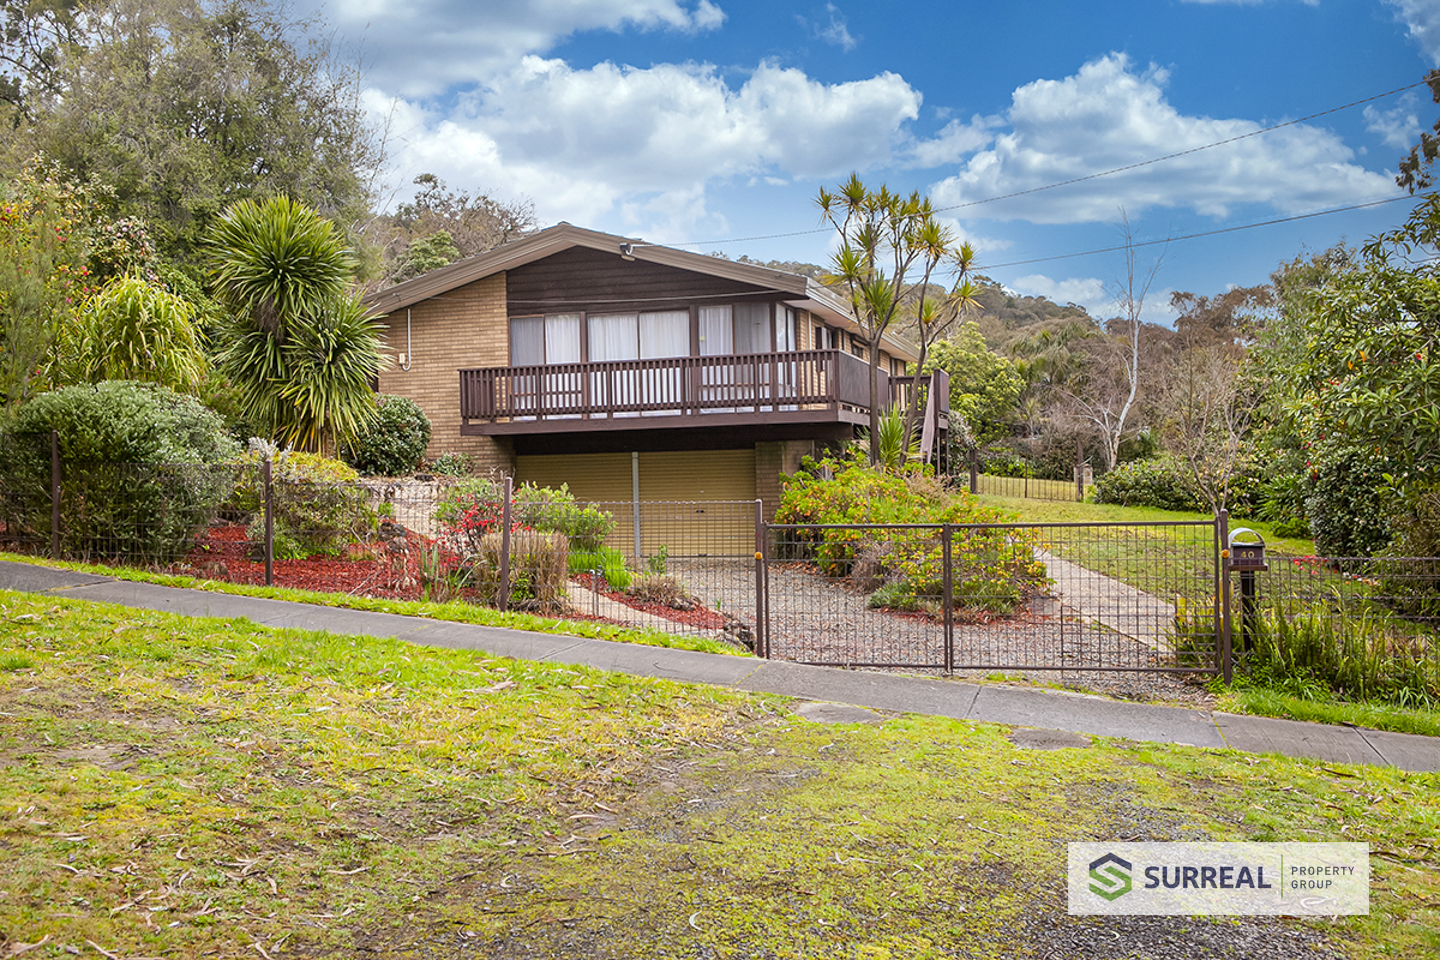 Leased House 40 Olivebank Road Ferntree Gully Vic 3156 Sep 18 2020 Homely